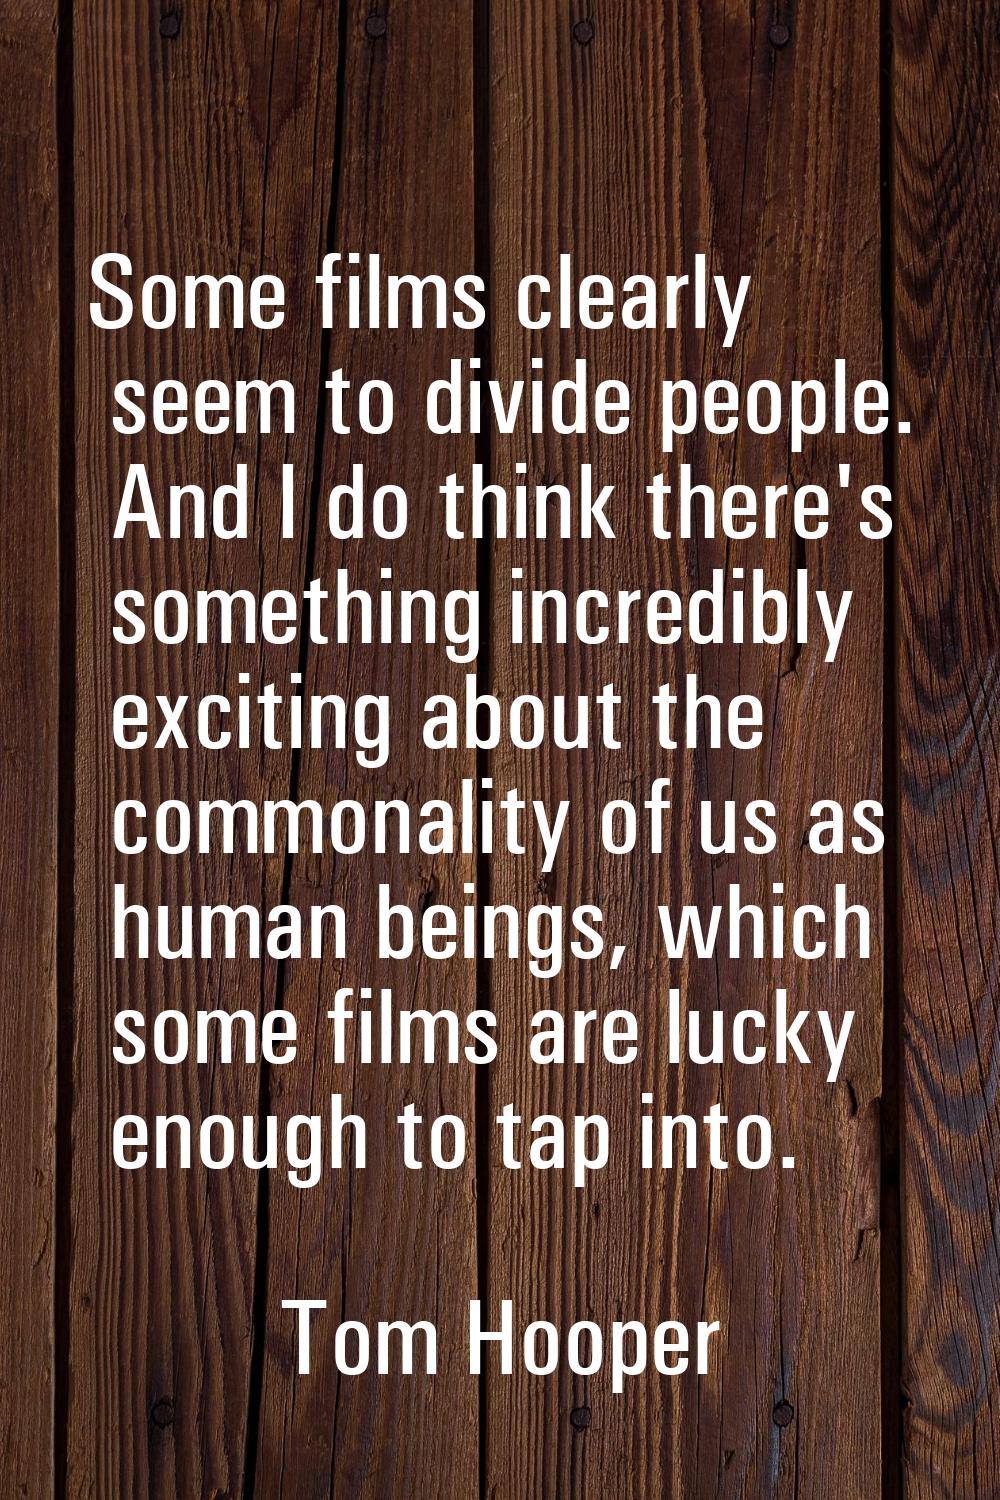 Some films clearly seem to divide people. And I do think there's something incredibly exciting abou